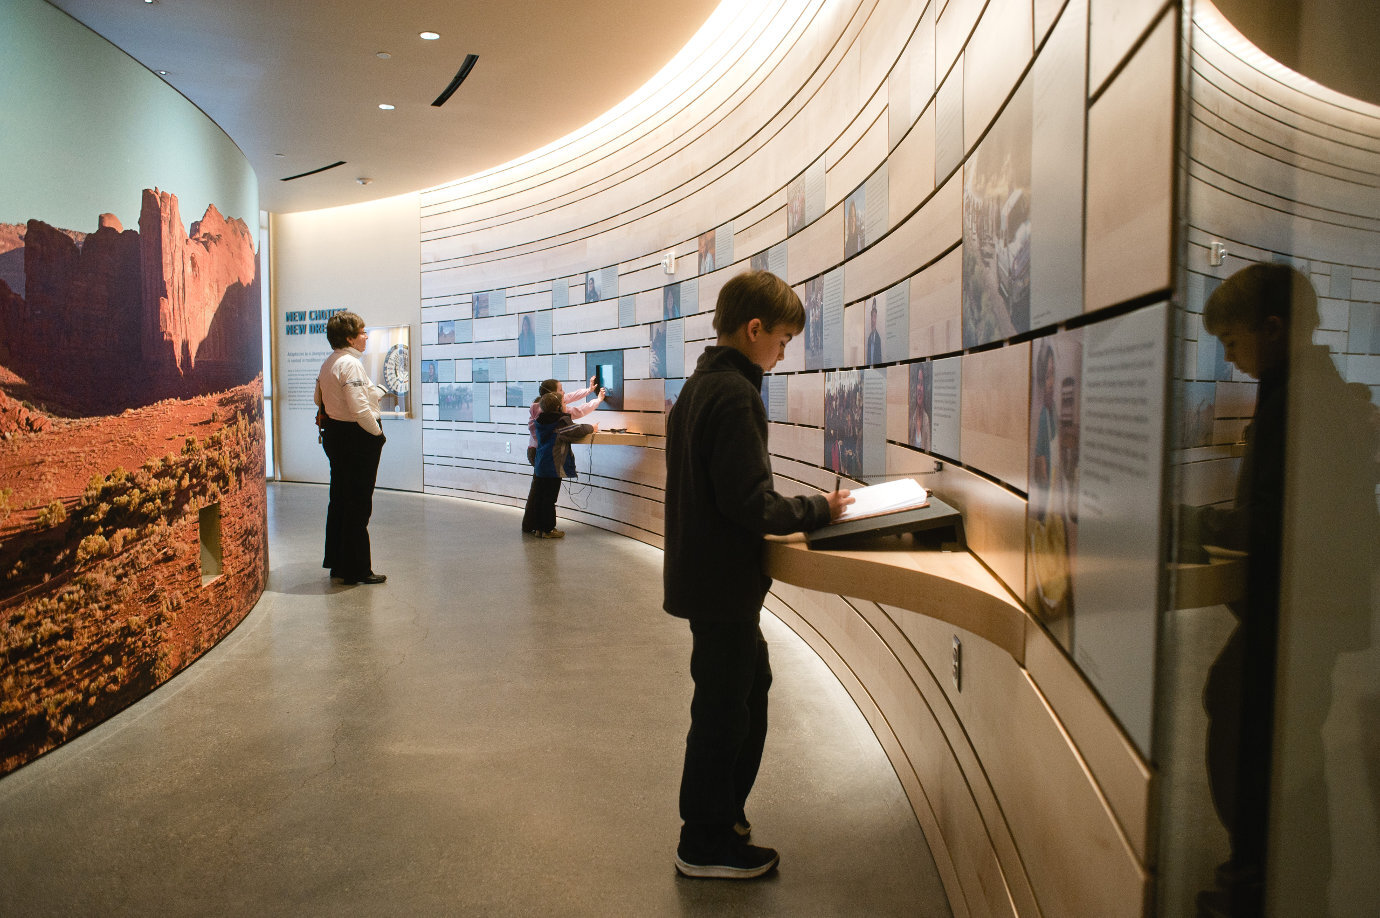 Children engage with interactive components of the *Native Voices* exhibition. Image courtesy of the Natural History Museum of Utah.